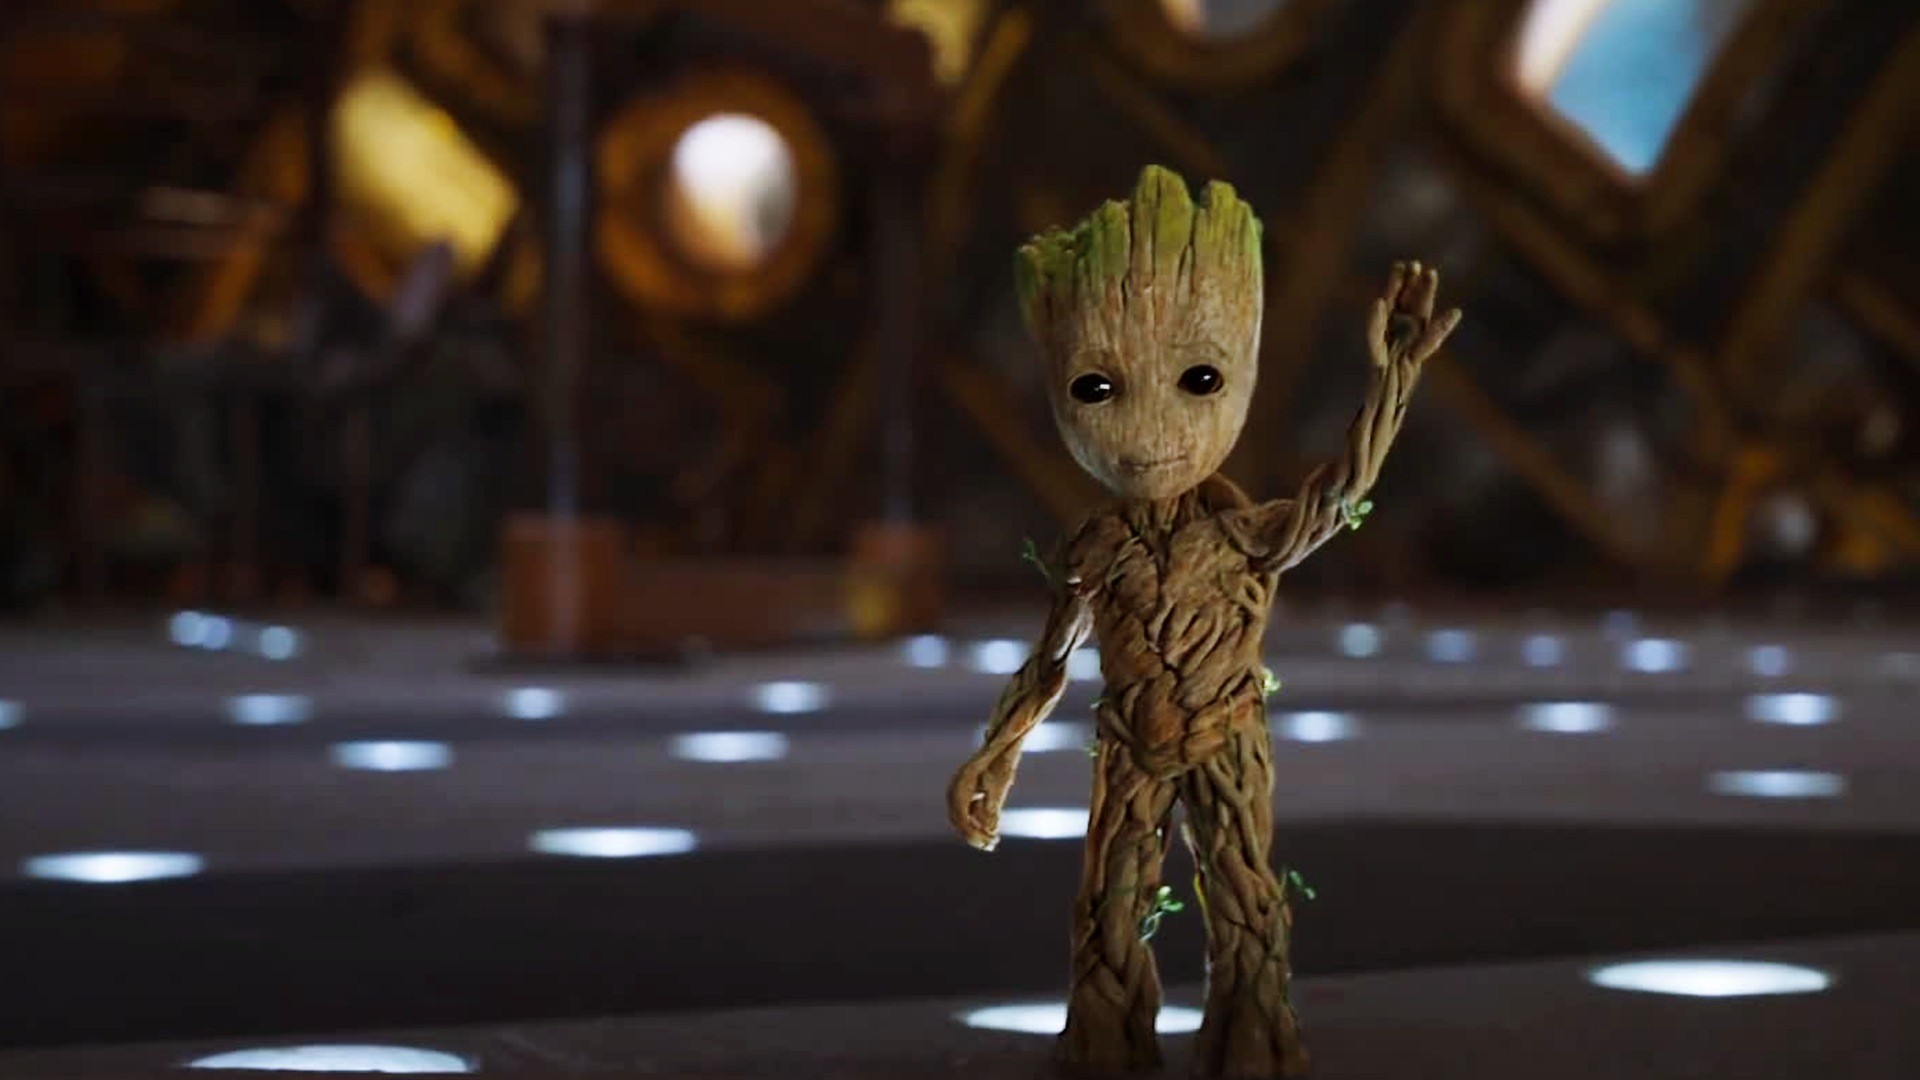 guardians of the galaxy wallpaper groot